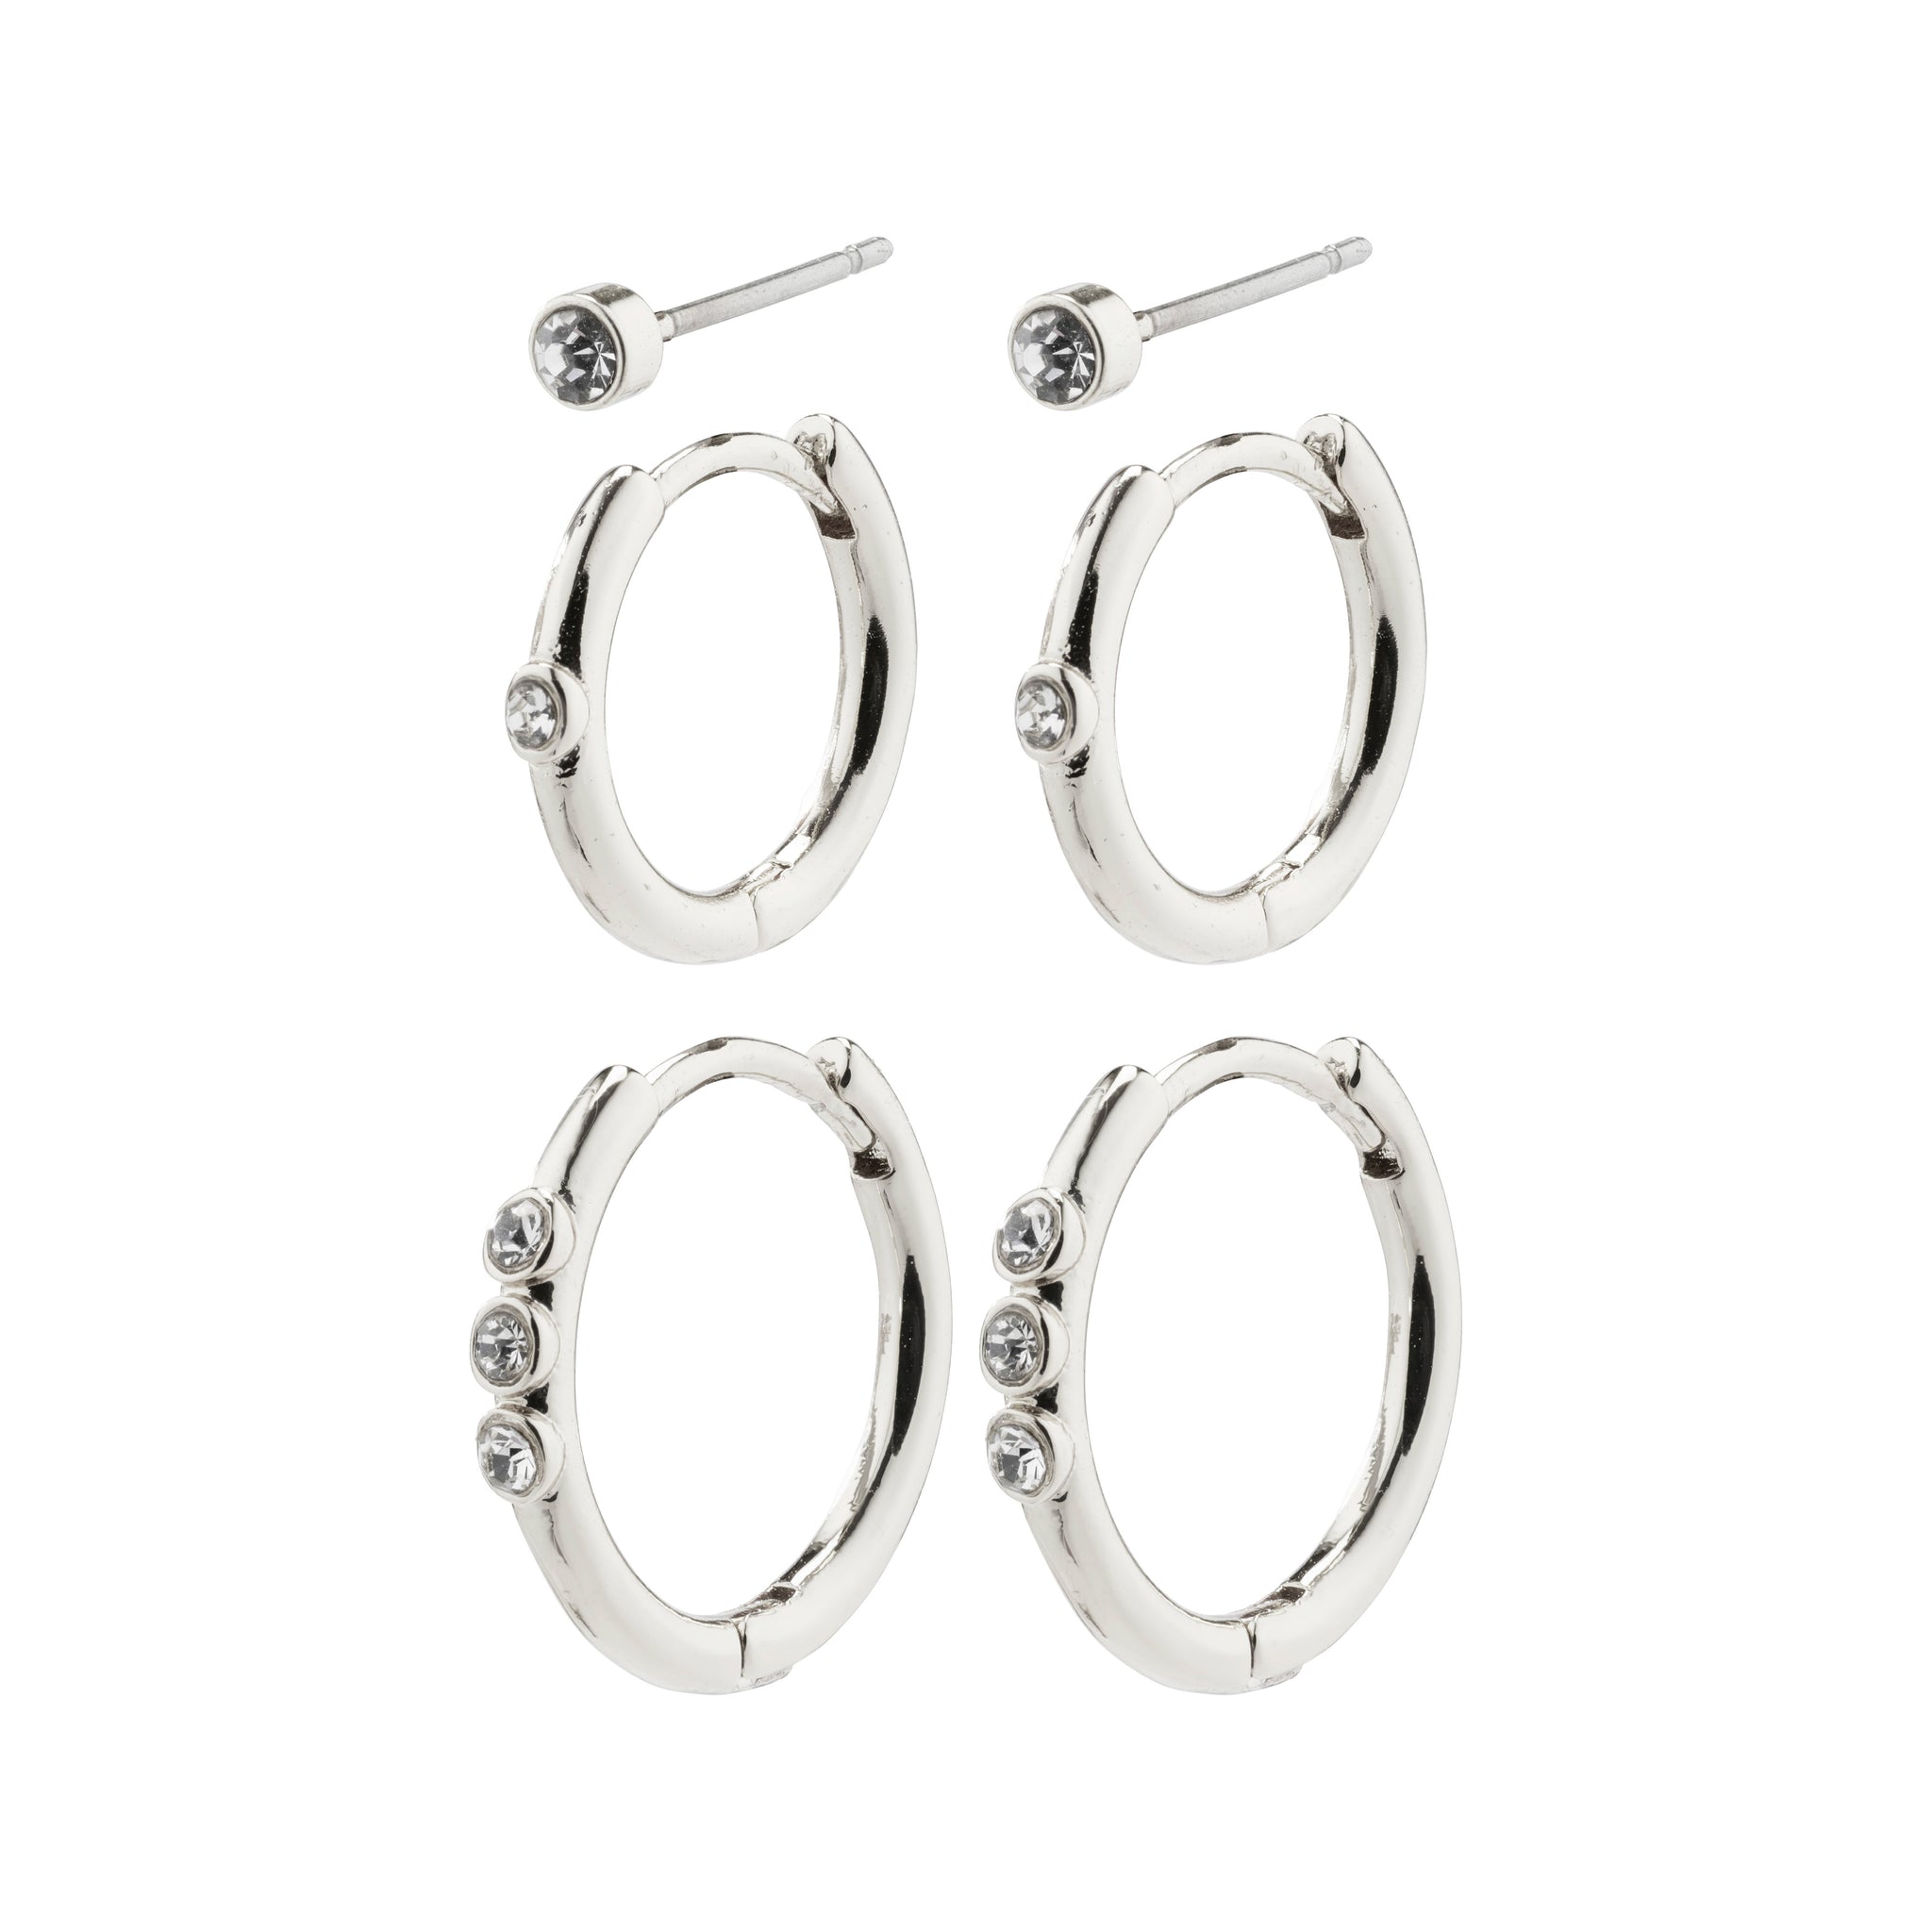 Ecstatic 3-in-1 Earring Set - Silver Plated